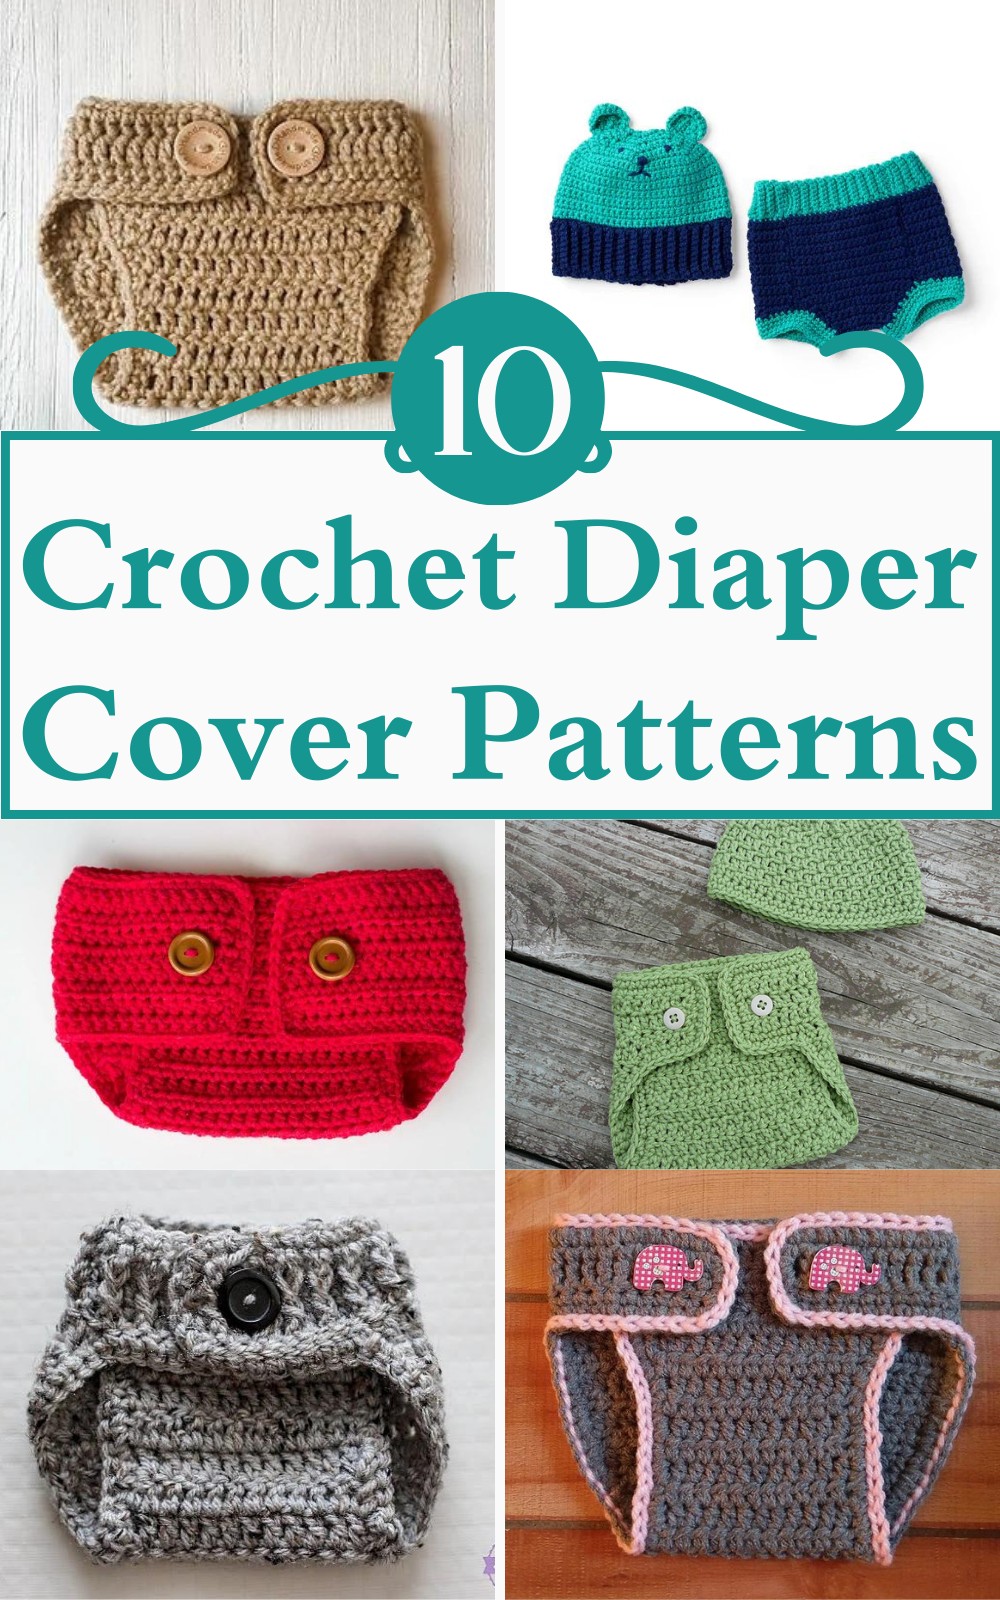 4 Free Crochet Diaper Cover Patterns